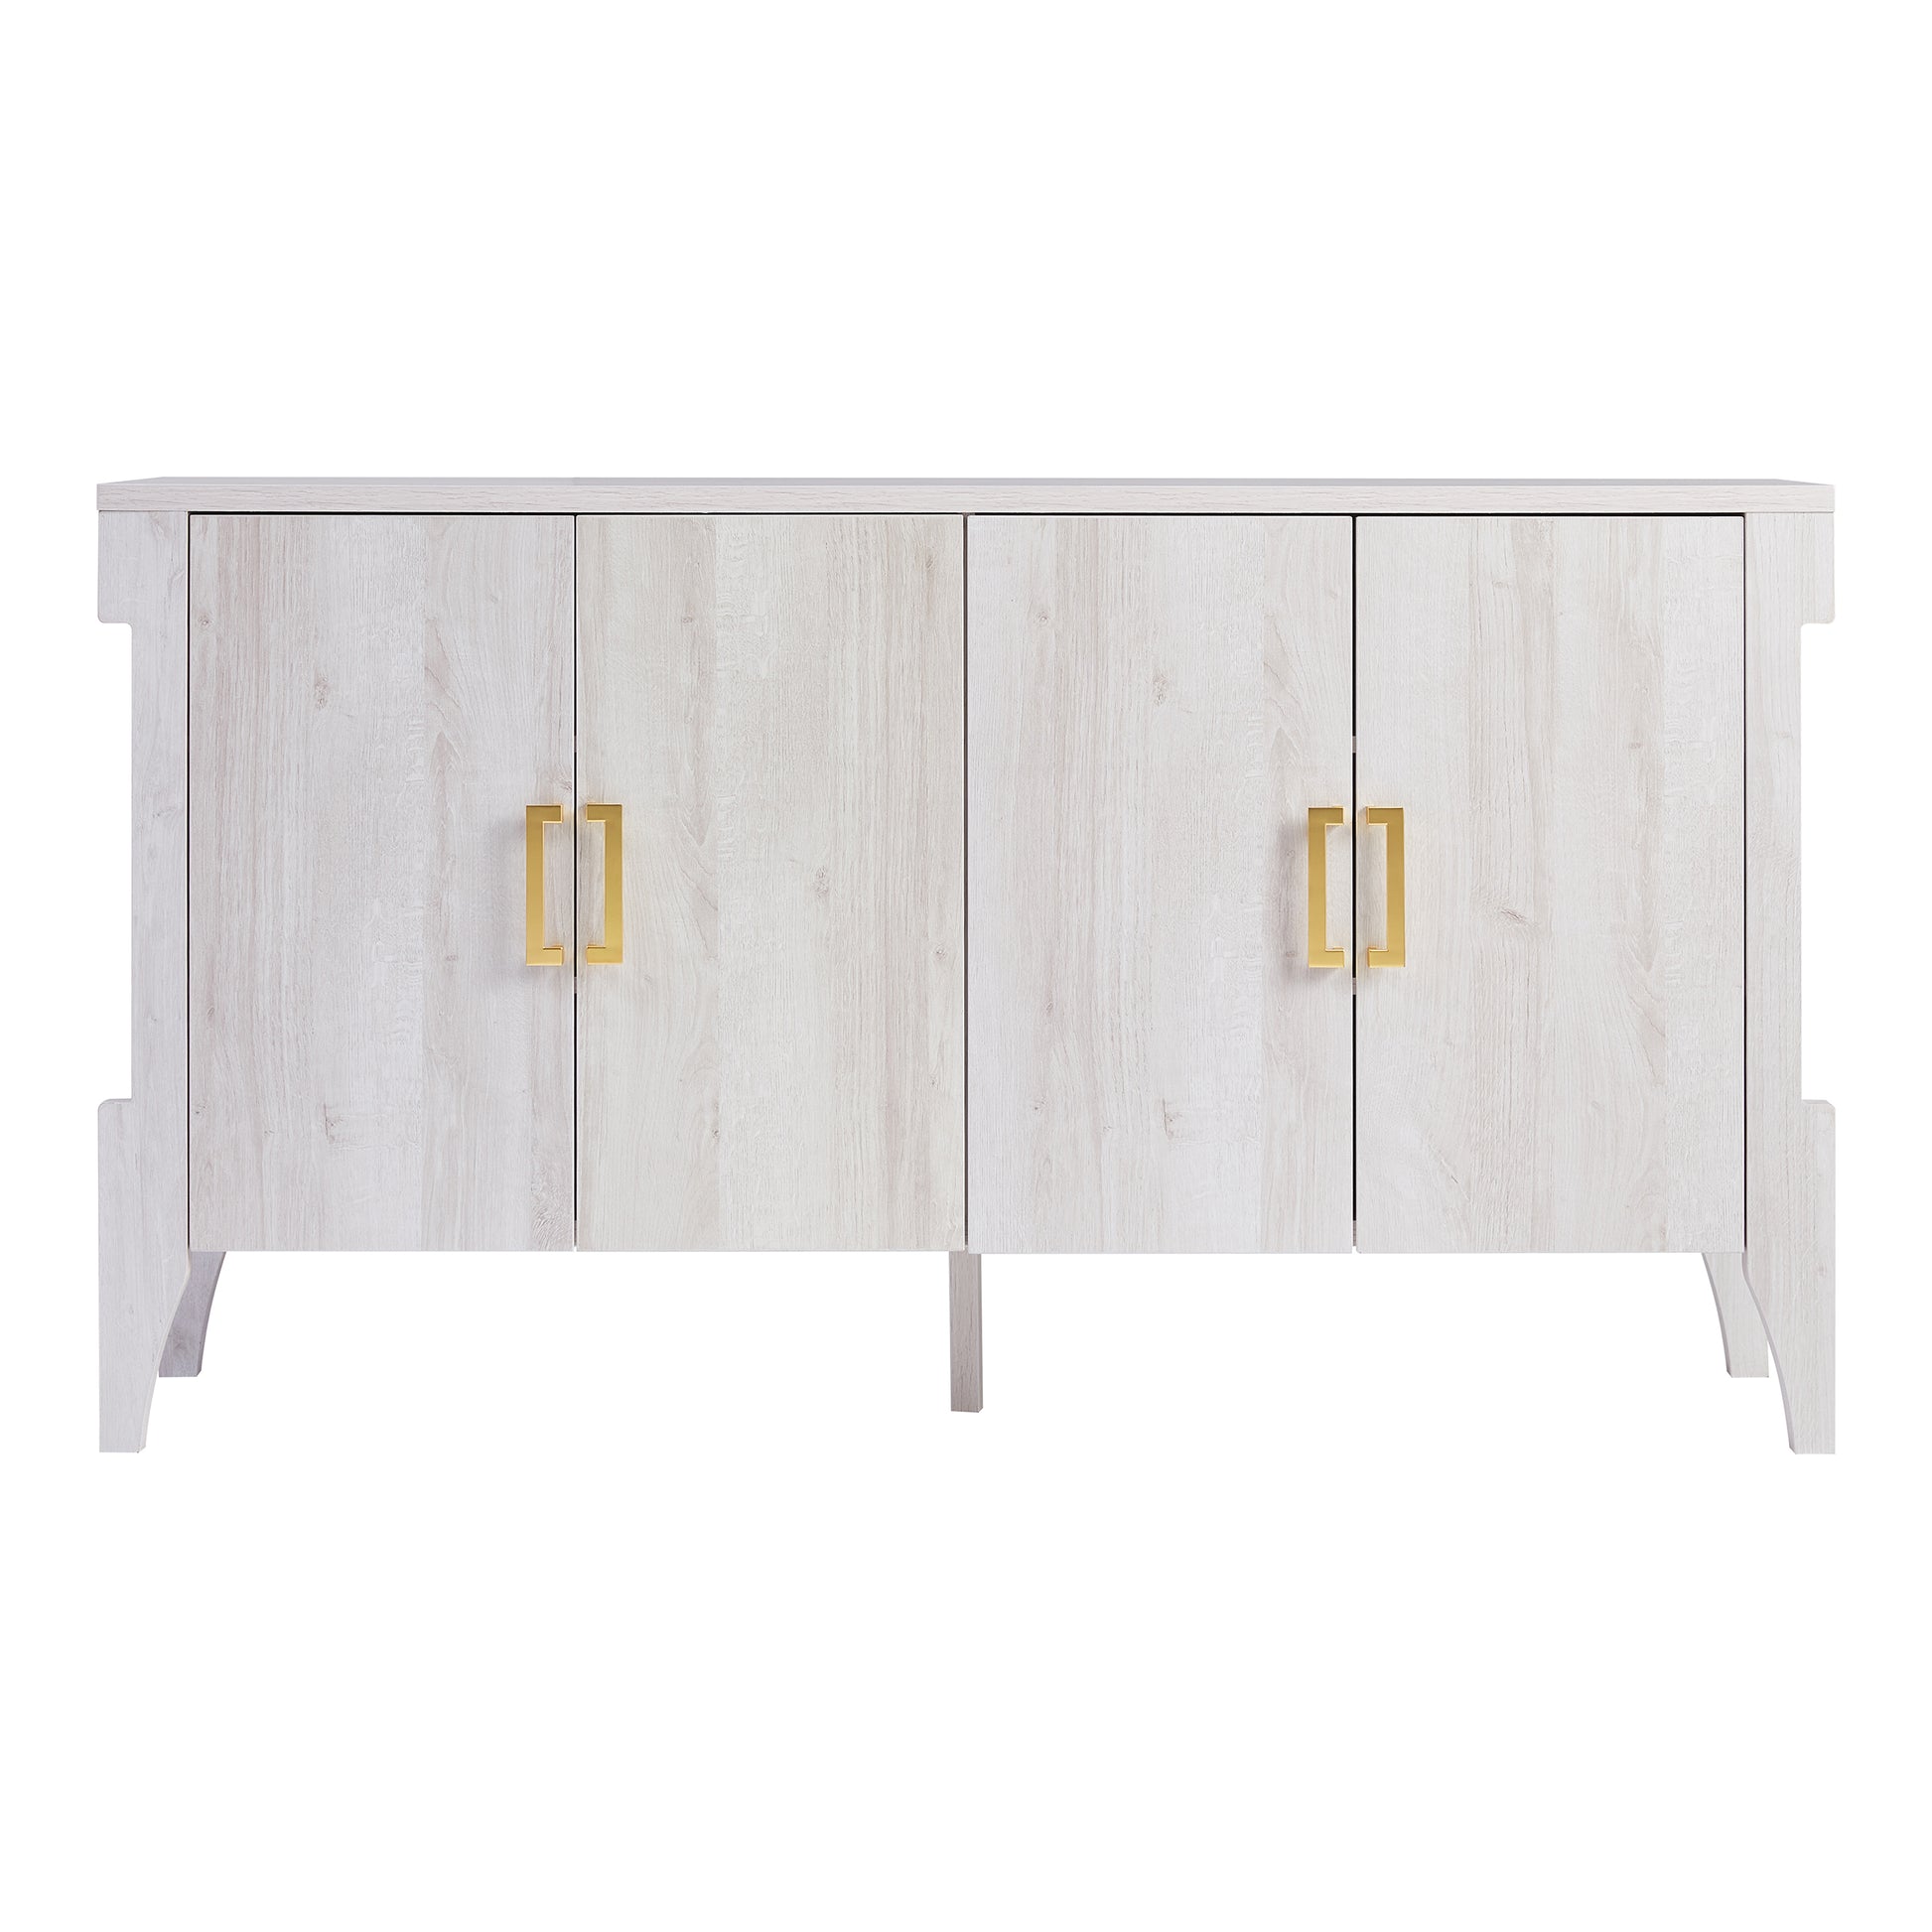 Front-facing transitional white oak four-door six-shelf buffet on a white background